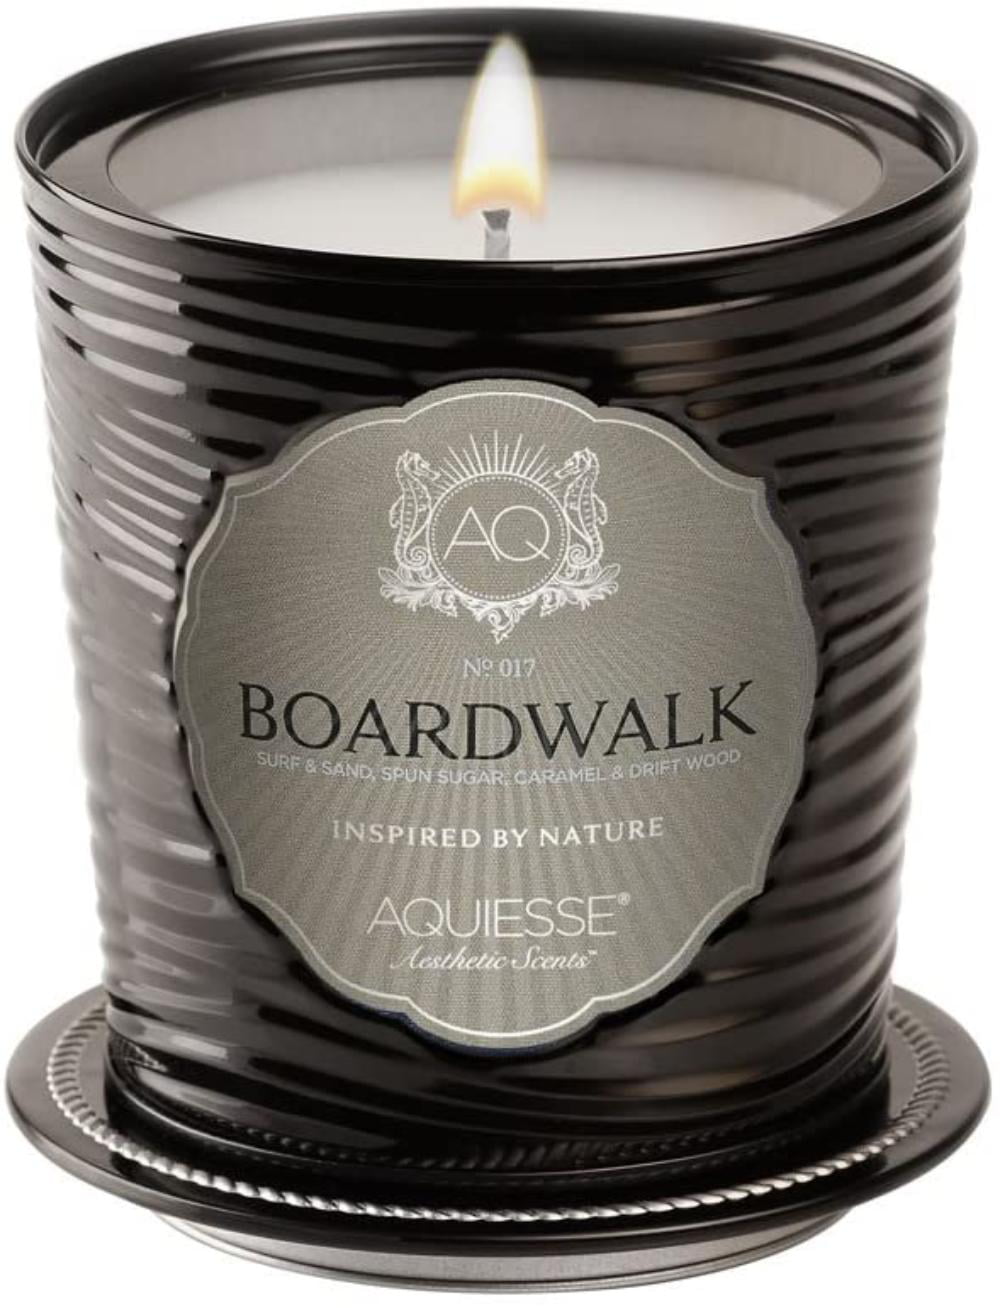 Driftwood Makers of Wax Goods Candle in Travel Tin